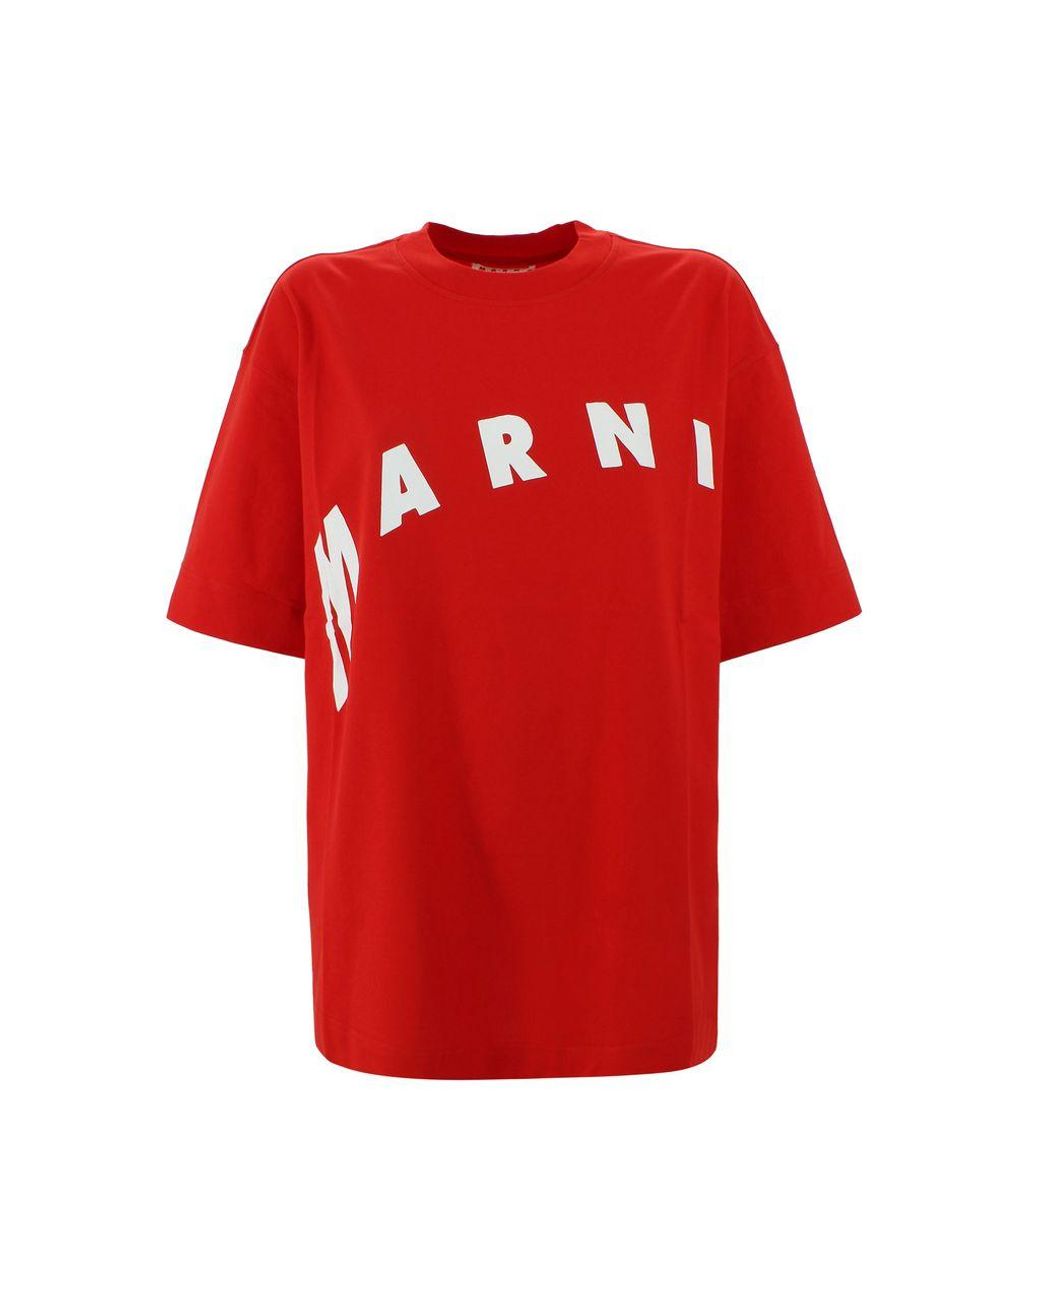 Marni Cotton Oversized T-shirt in Red - Lyst